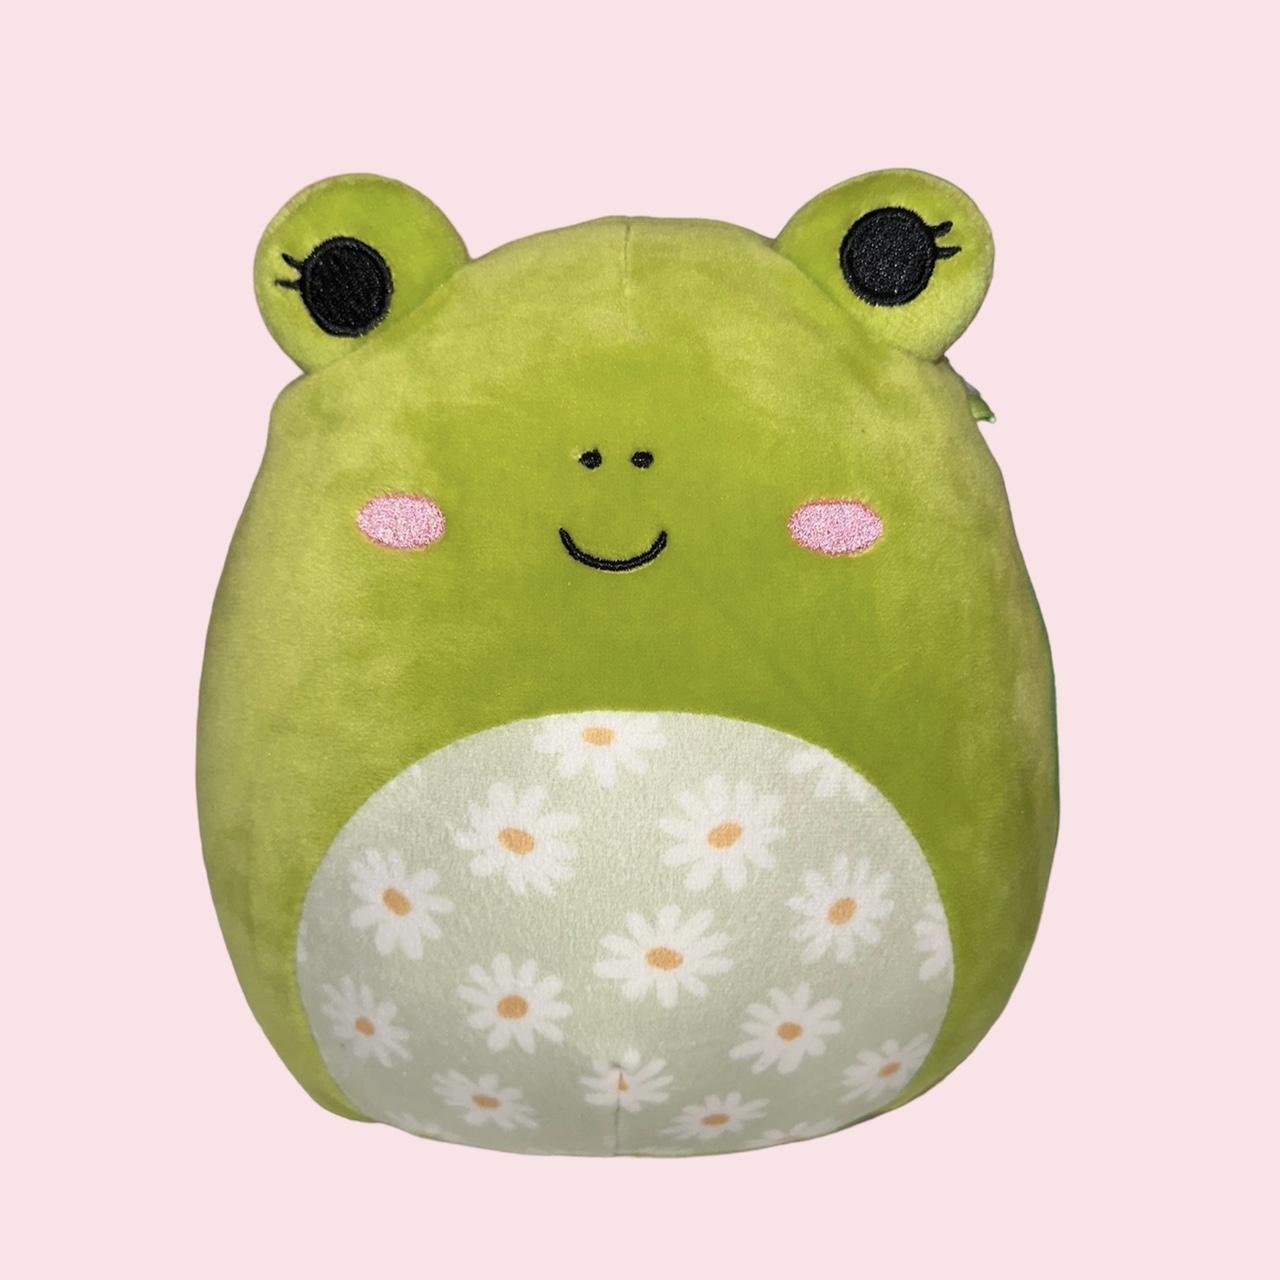 Wendy the frog squishmallow. Squishmallows is brand - Depop